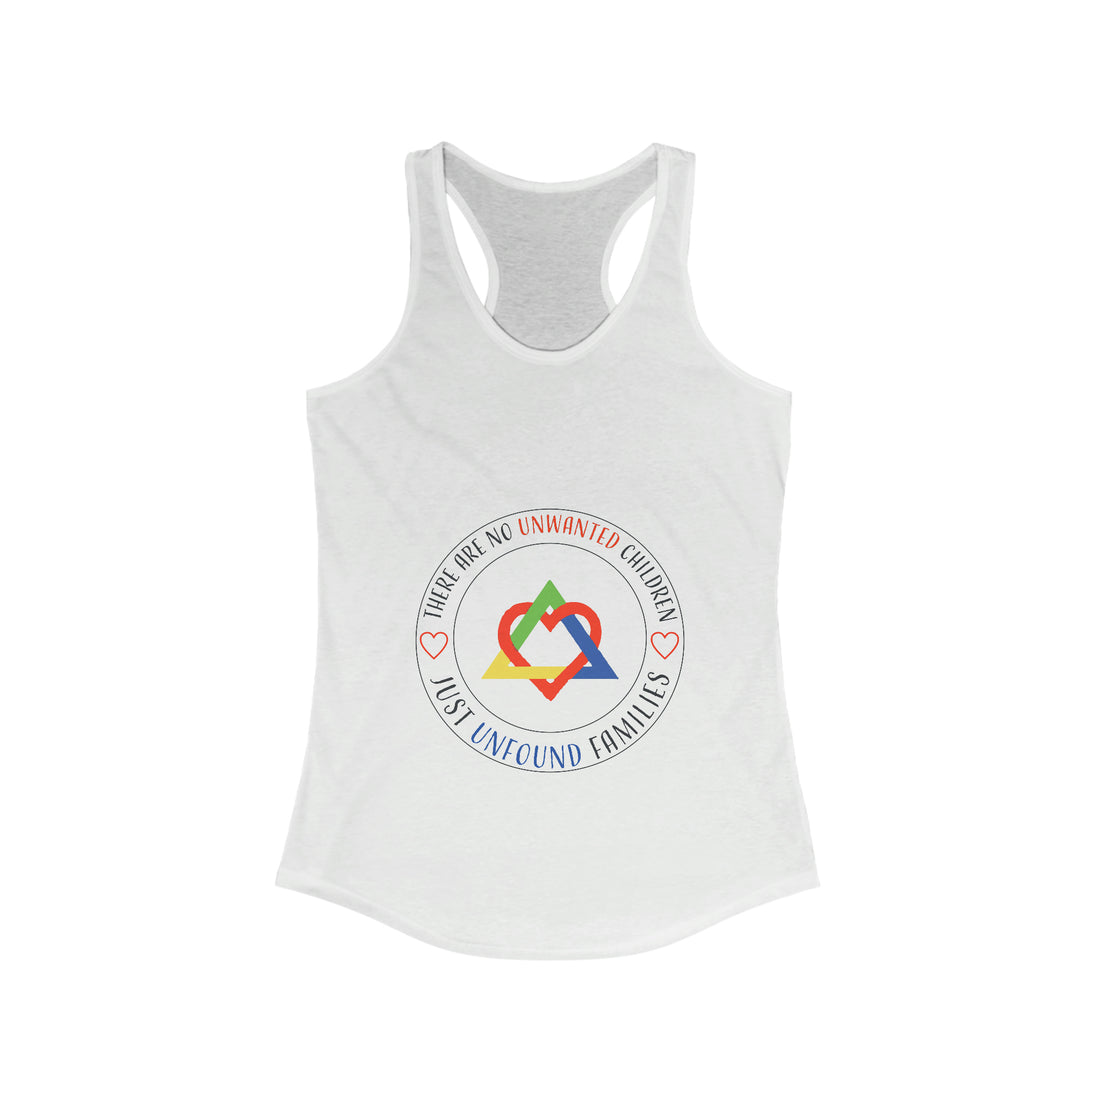 There are No Unwanted Children Only Unfound Families - Racerback Tank